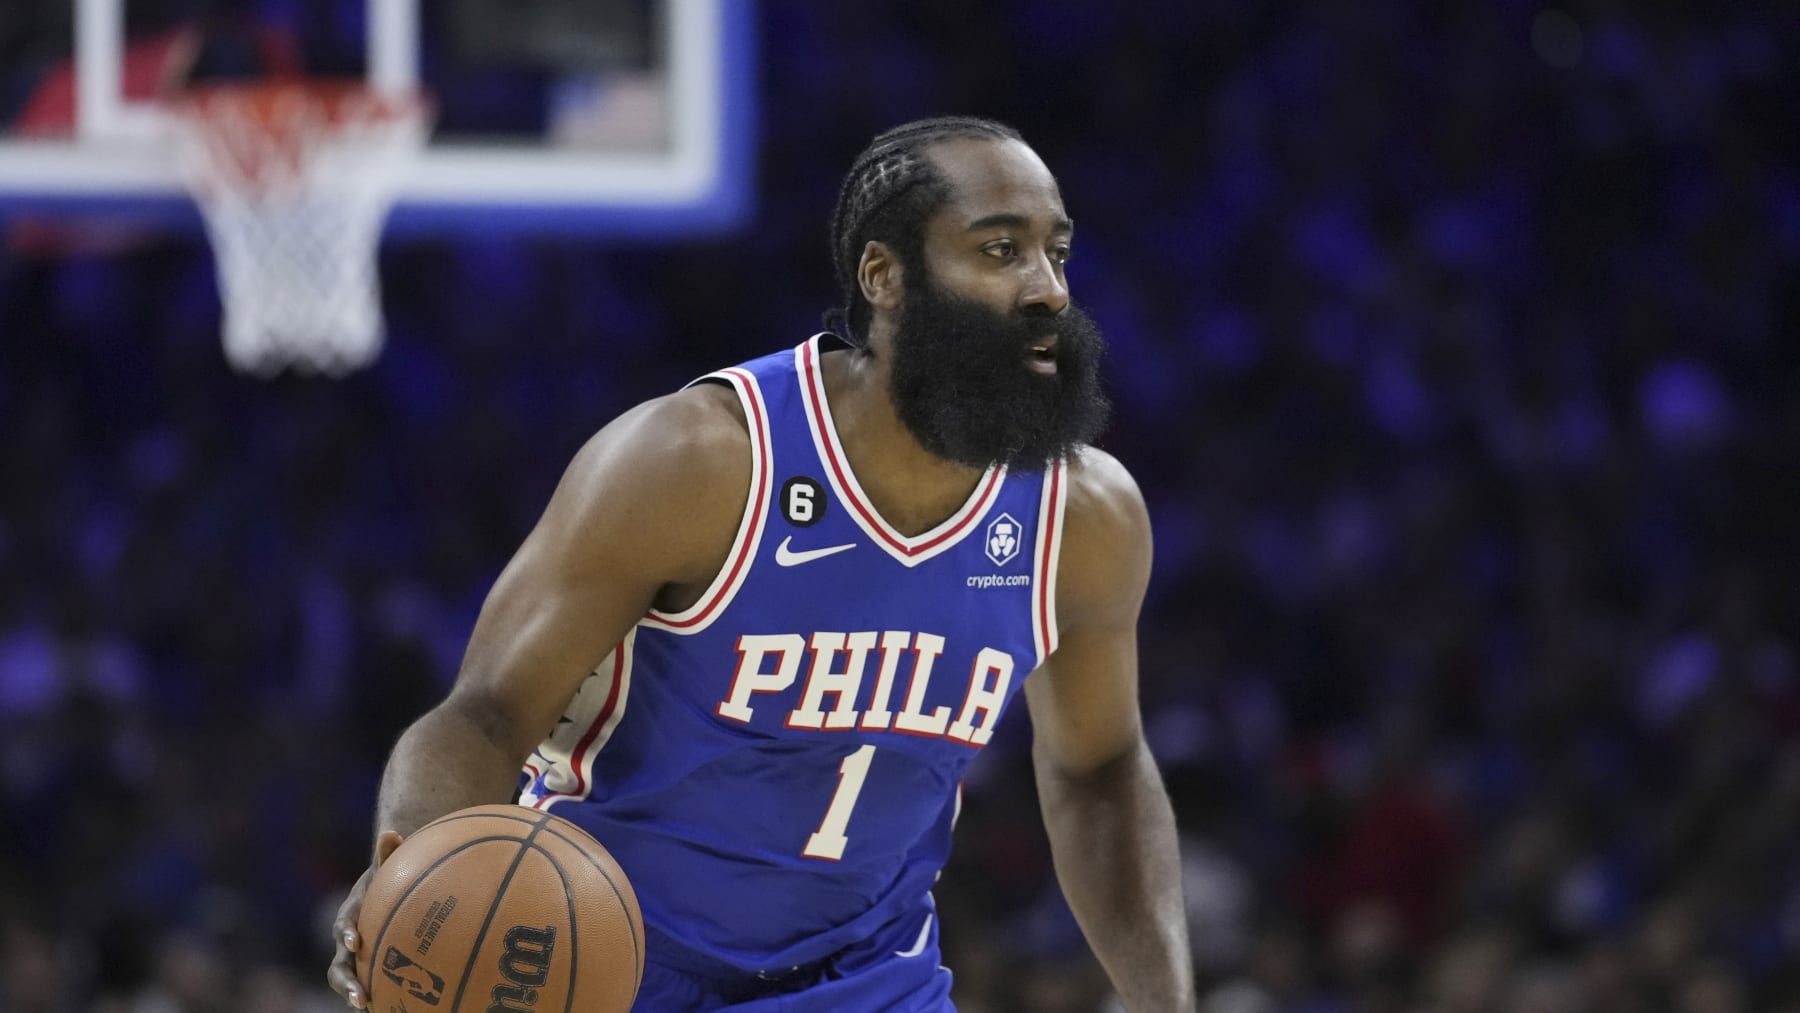 James Harden's outfit set Sixers Twitter ablaze last night. That's